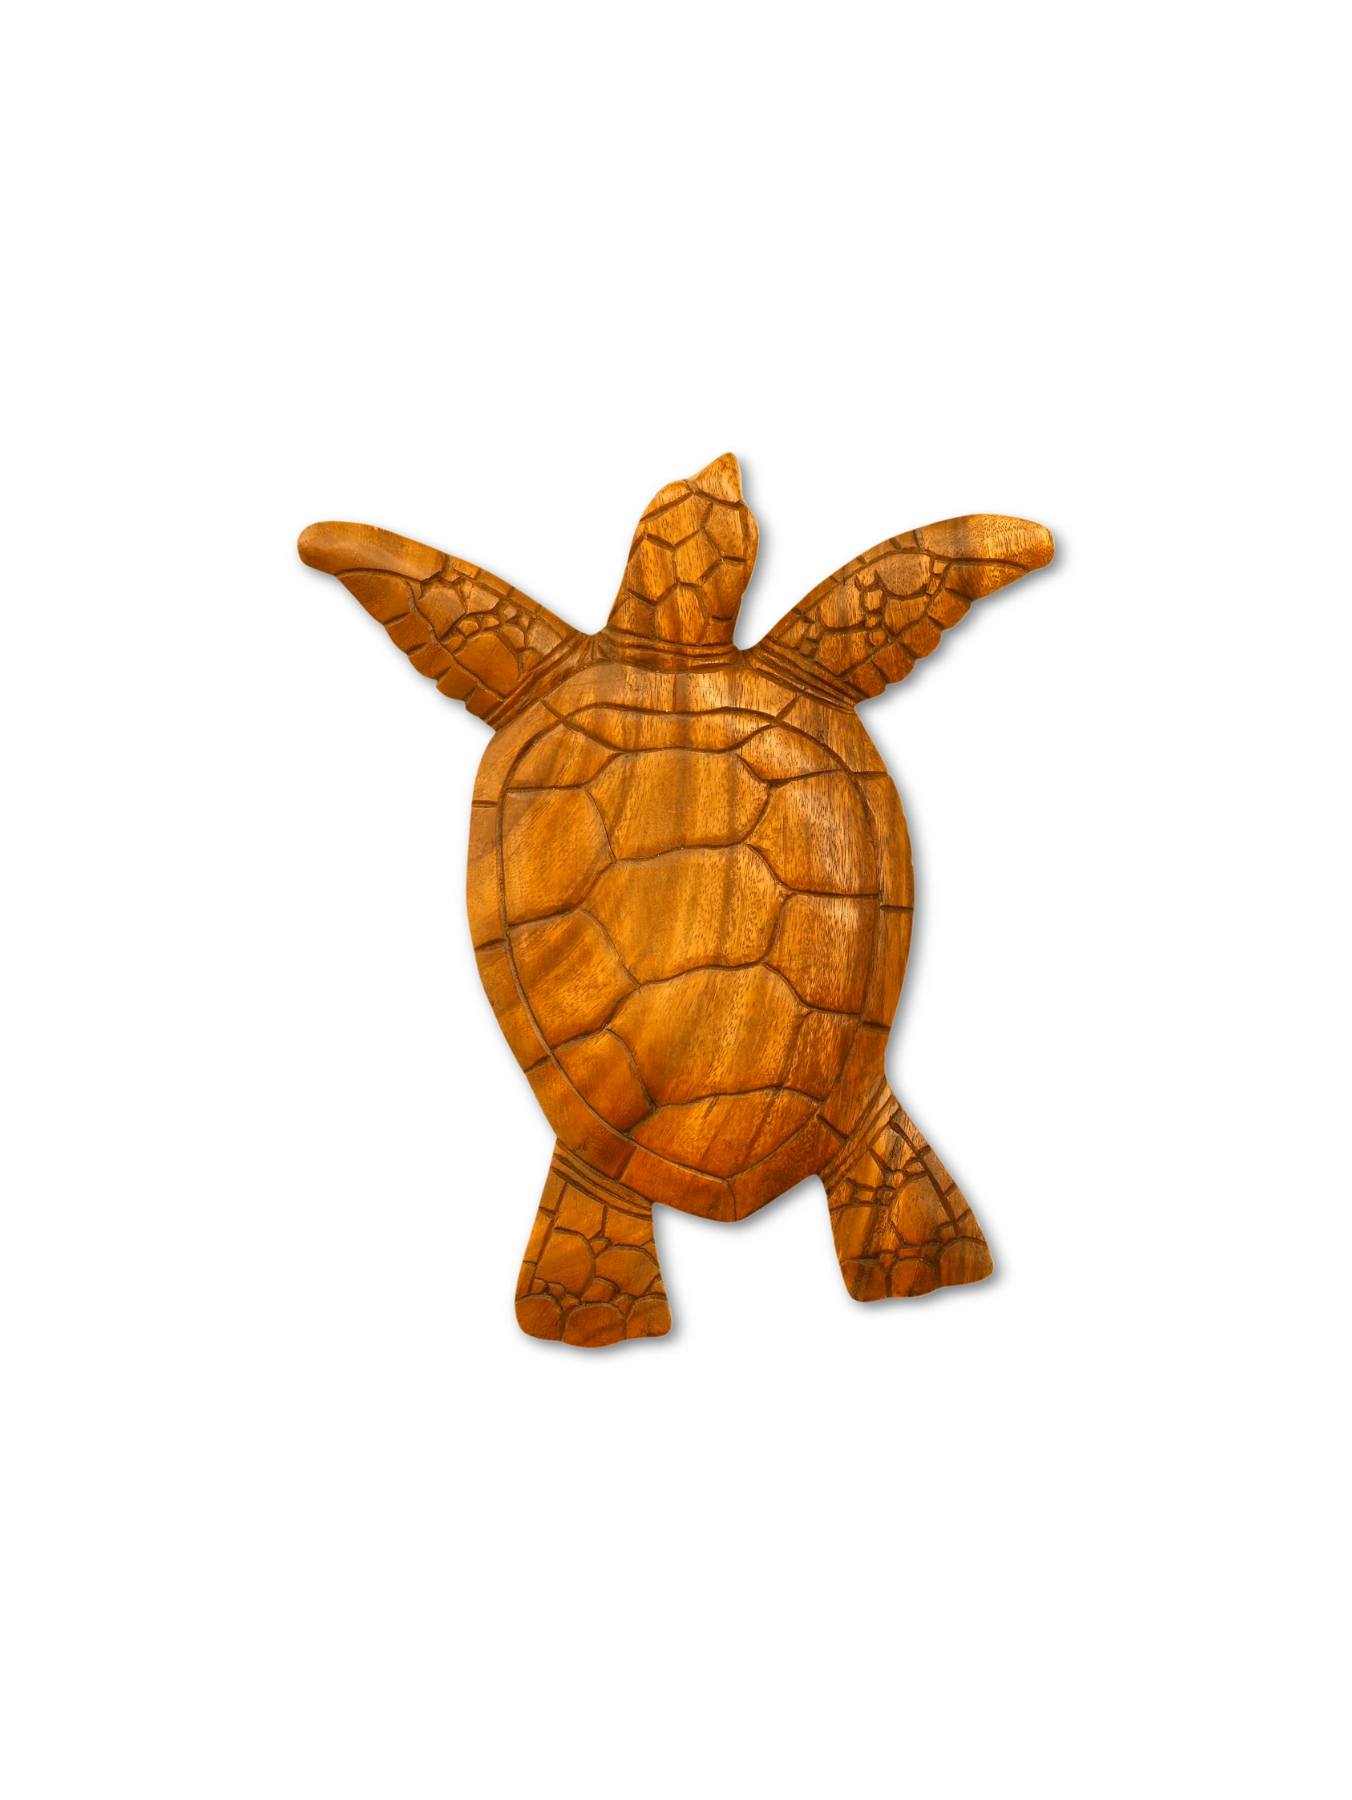 12" Wooden Tortoise Turtle Wall Hanging Home Decor Sculpture Statue Hand Carved Figurine Handcrafted Handmade Seaside Tropical Nautical Ocean Coastal